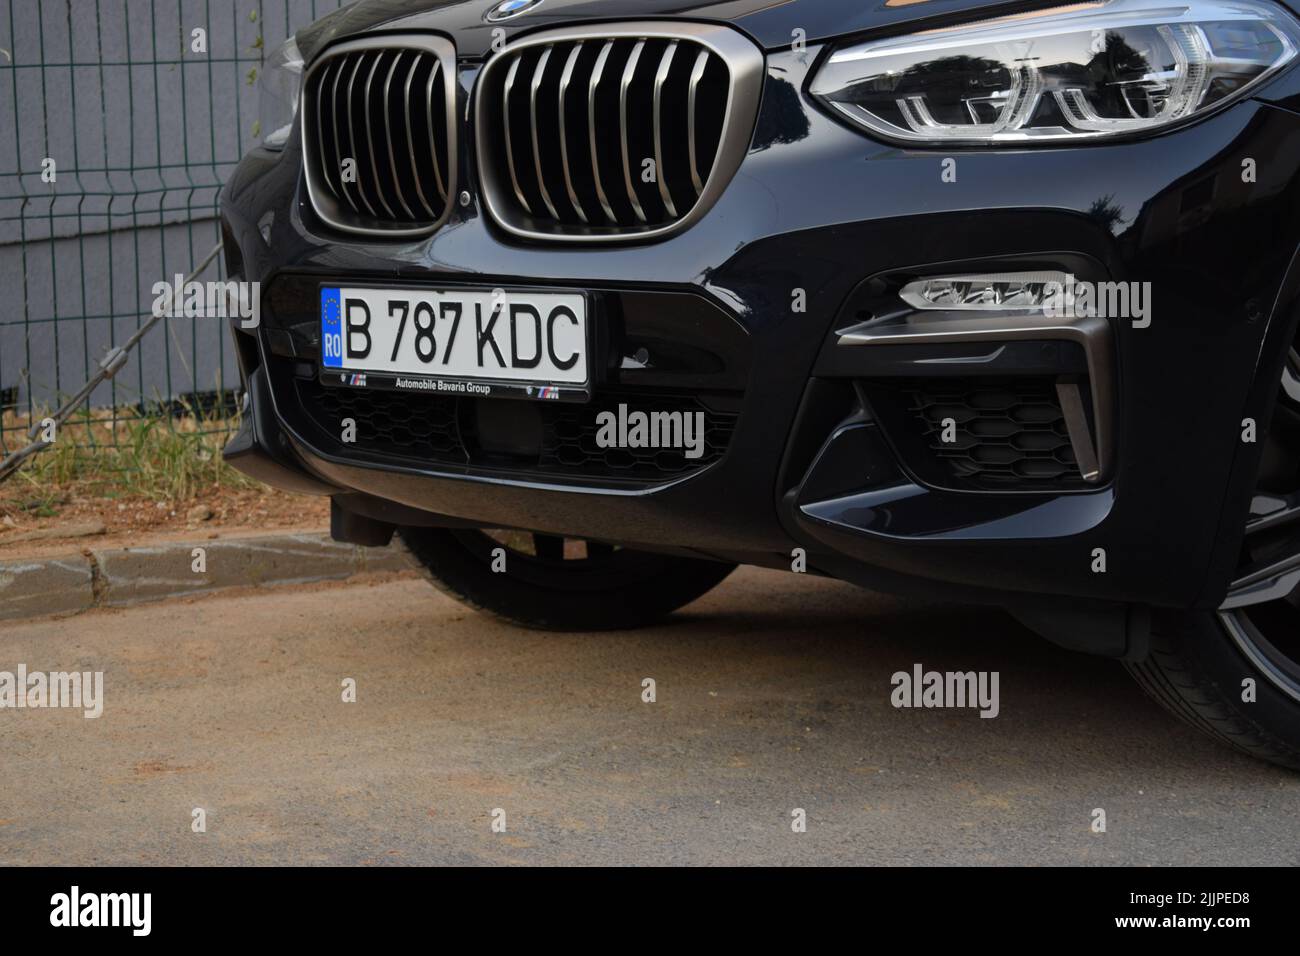 A view of a black BMW car on the road Stock Photo